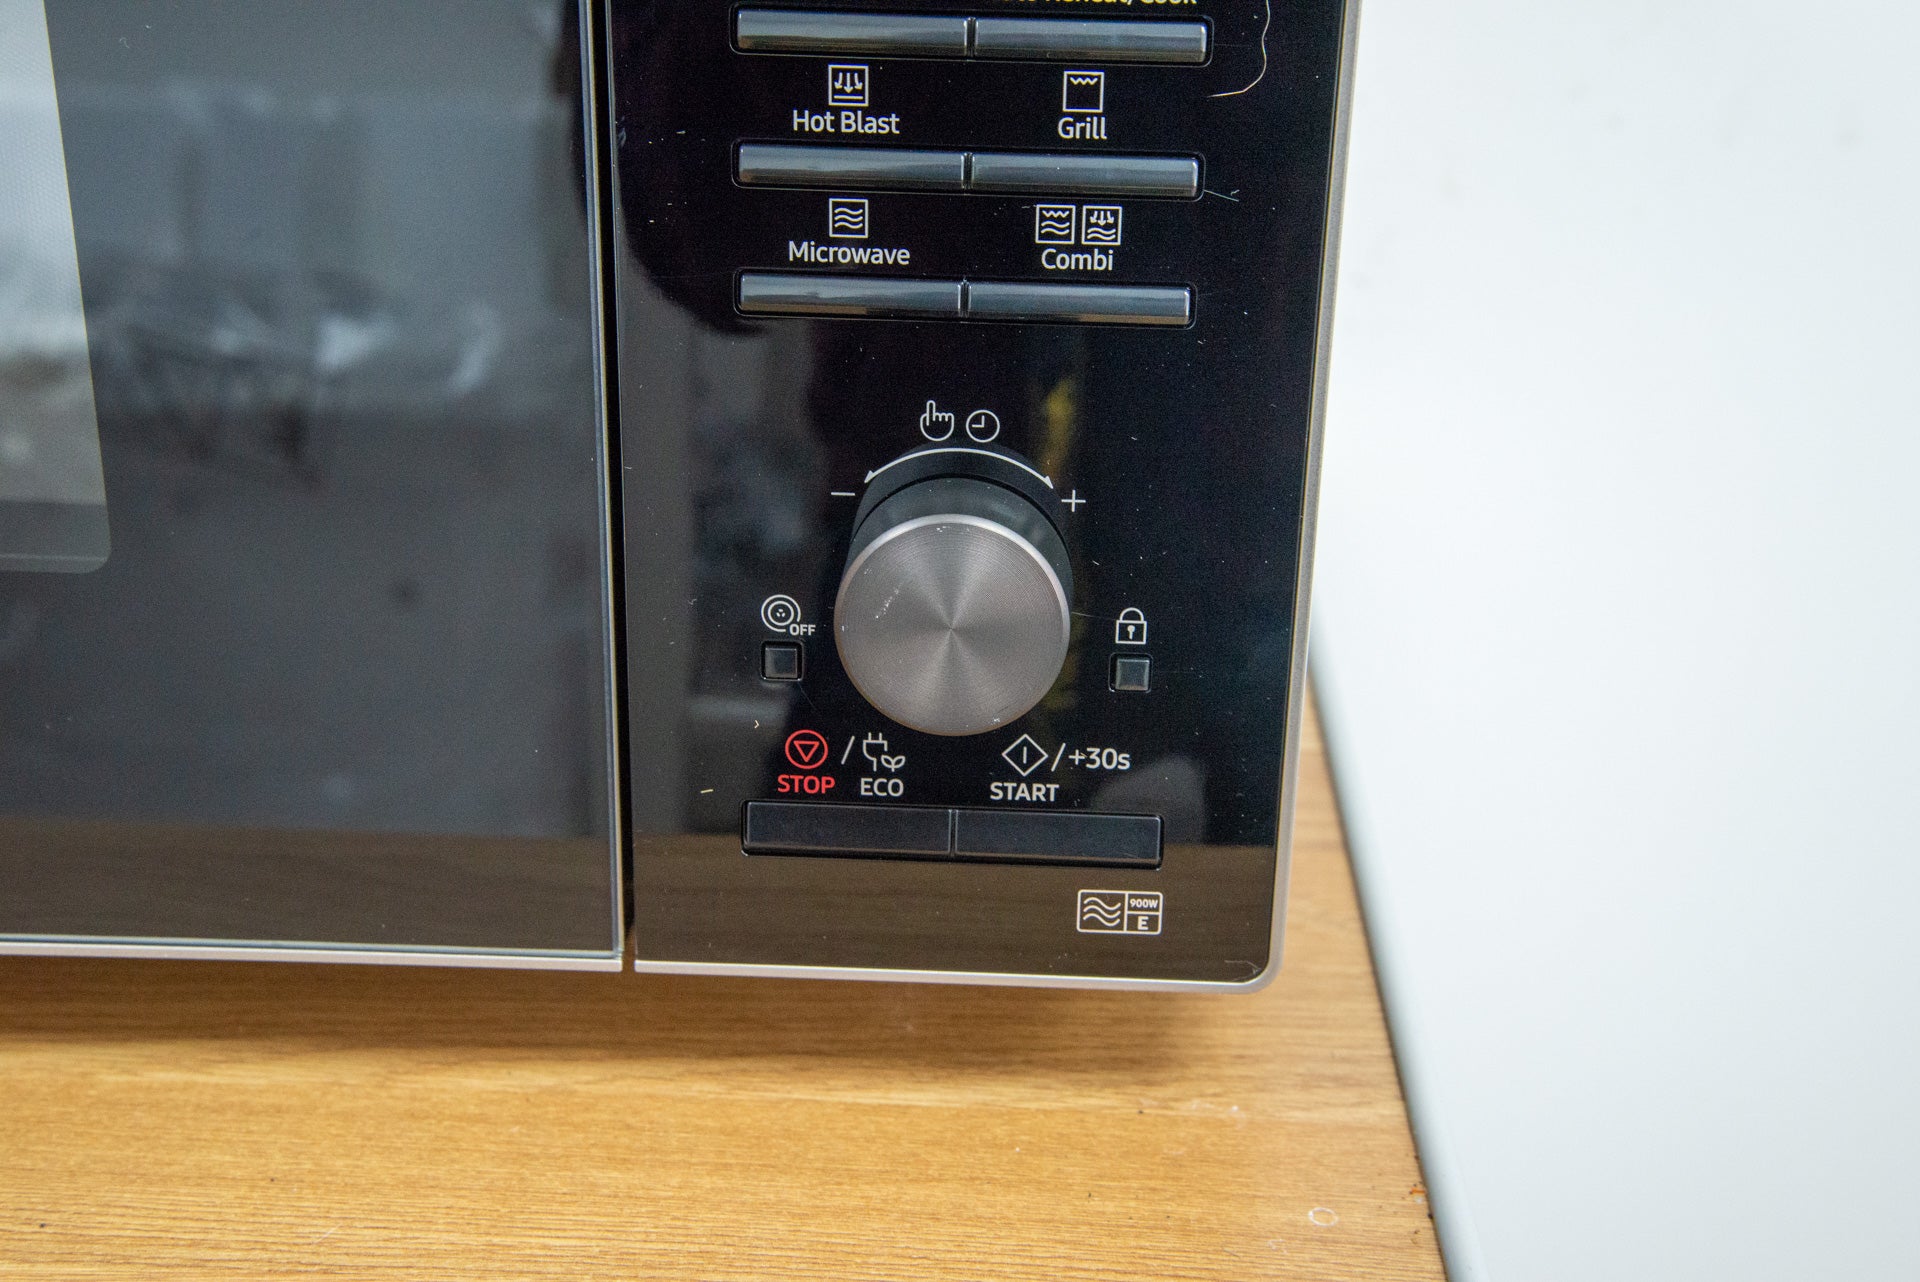 Samsung Easy View Convection Oven with HotBlast Technology MC28M6075CS dials